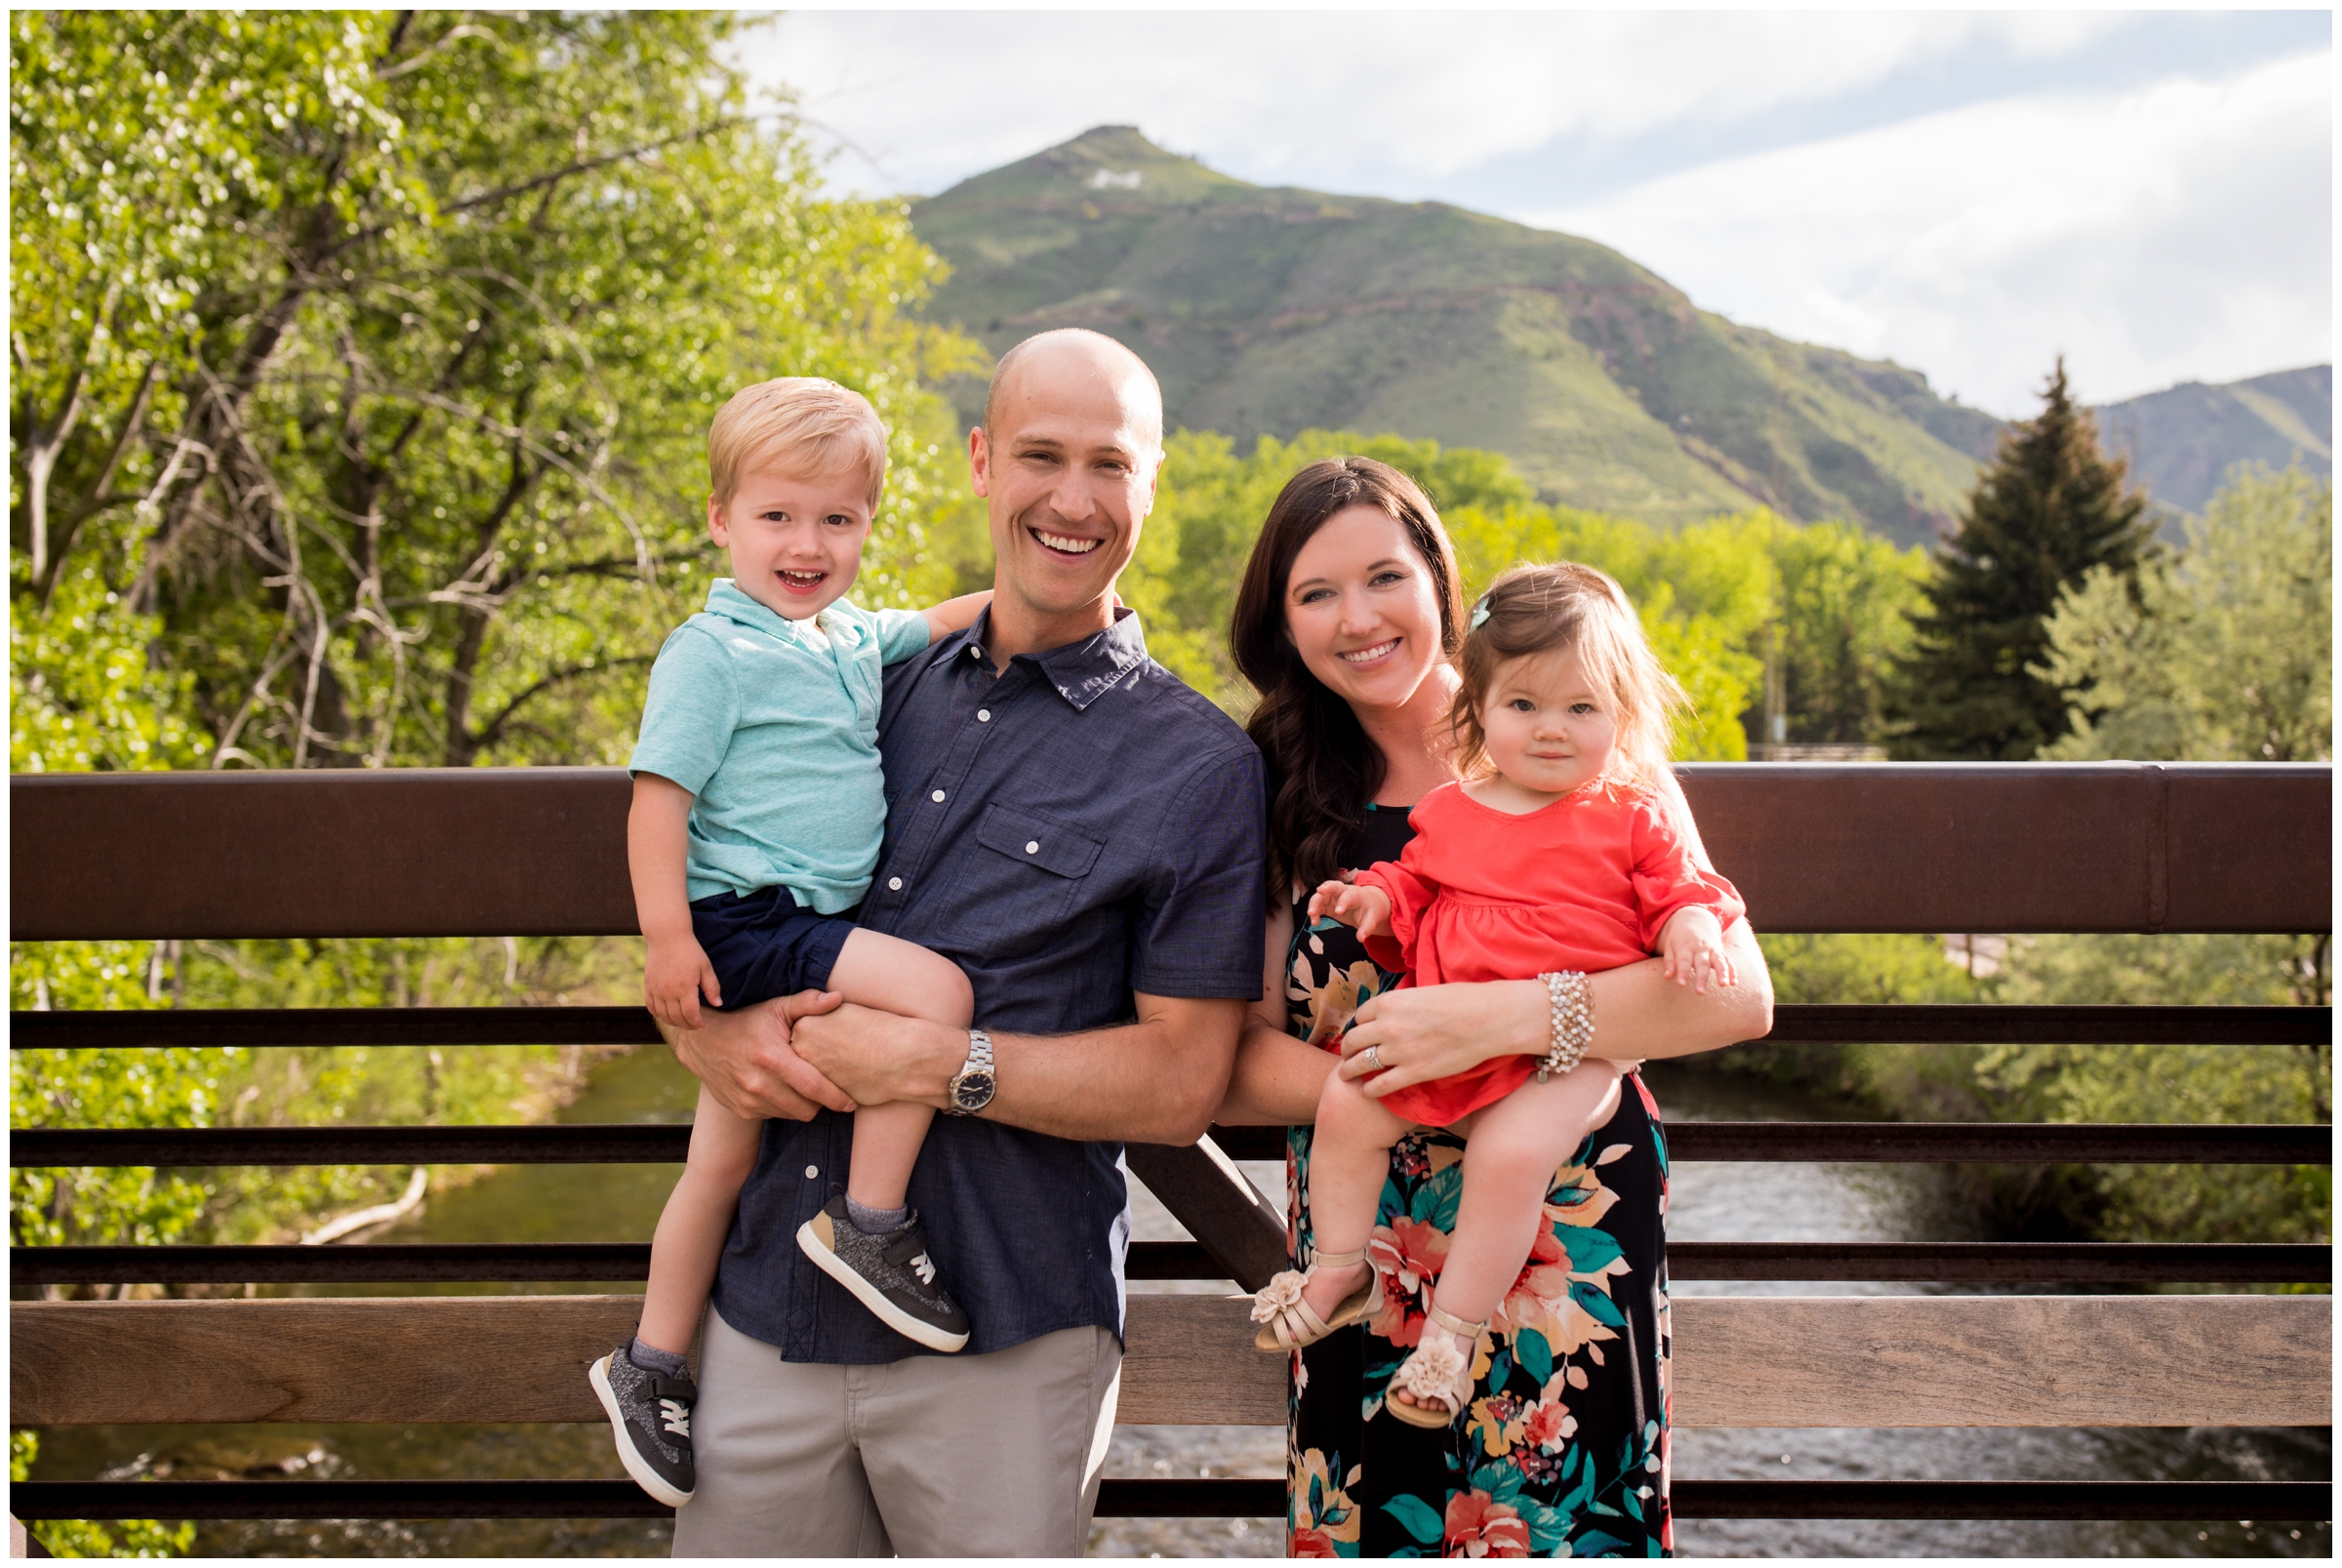 family standing on bridge with mountains in background during Colorado portrait photography session 